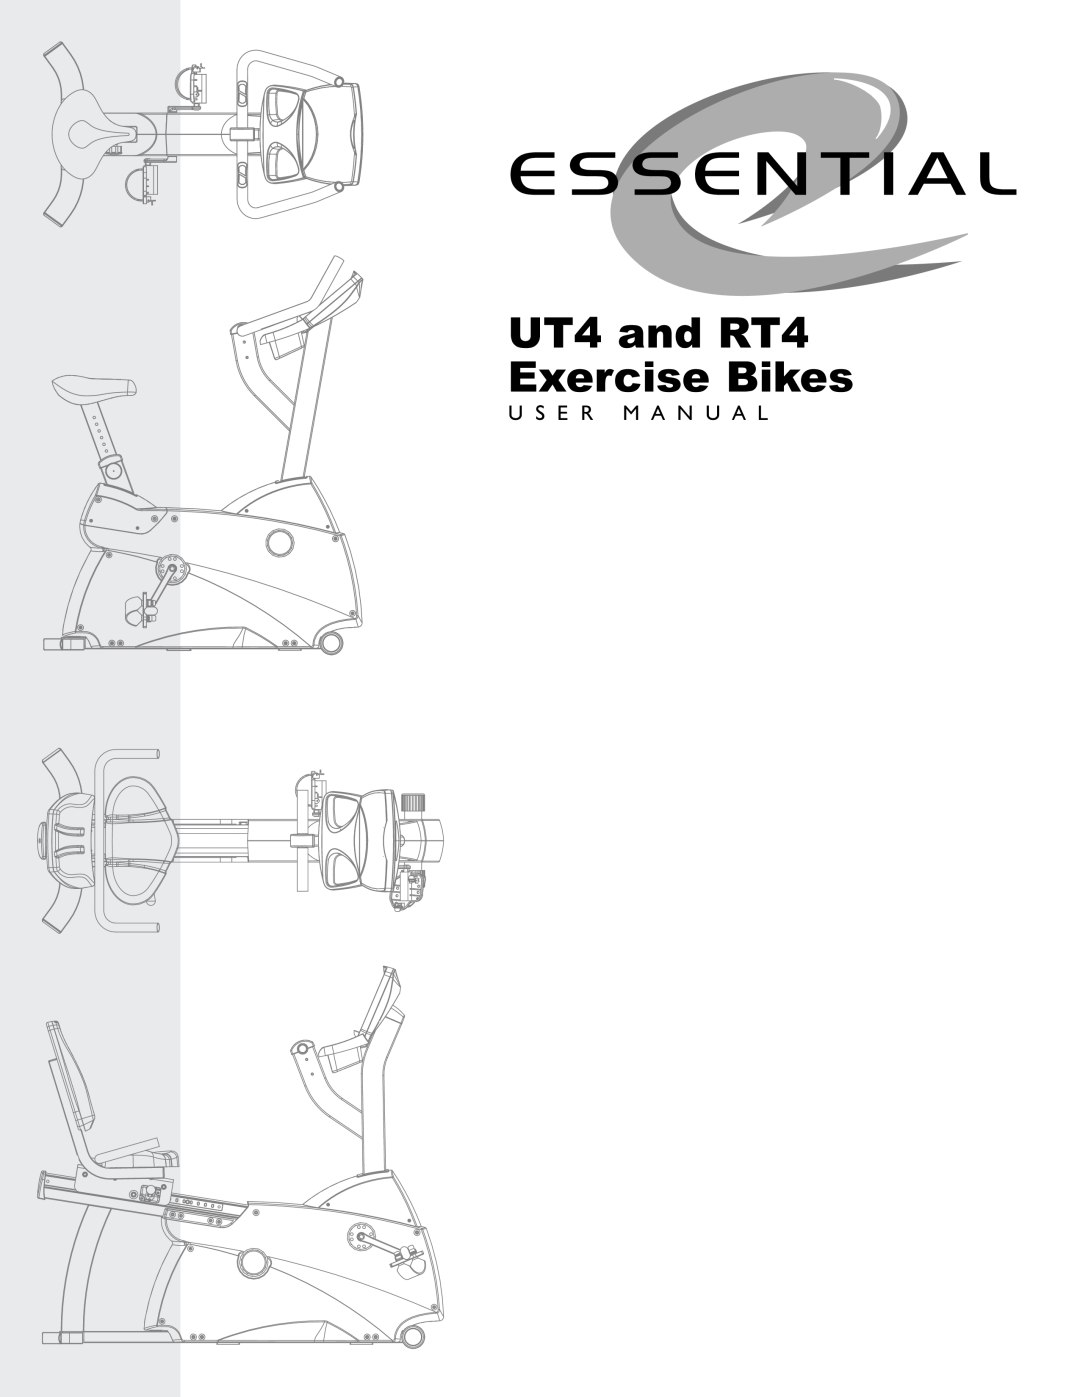 Life Fitness user manual UT4 and RT4 Exercise Bikes, U S E R M A N U A L 